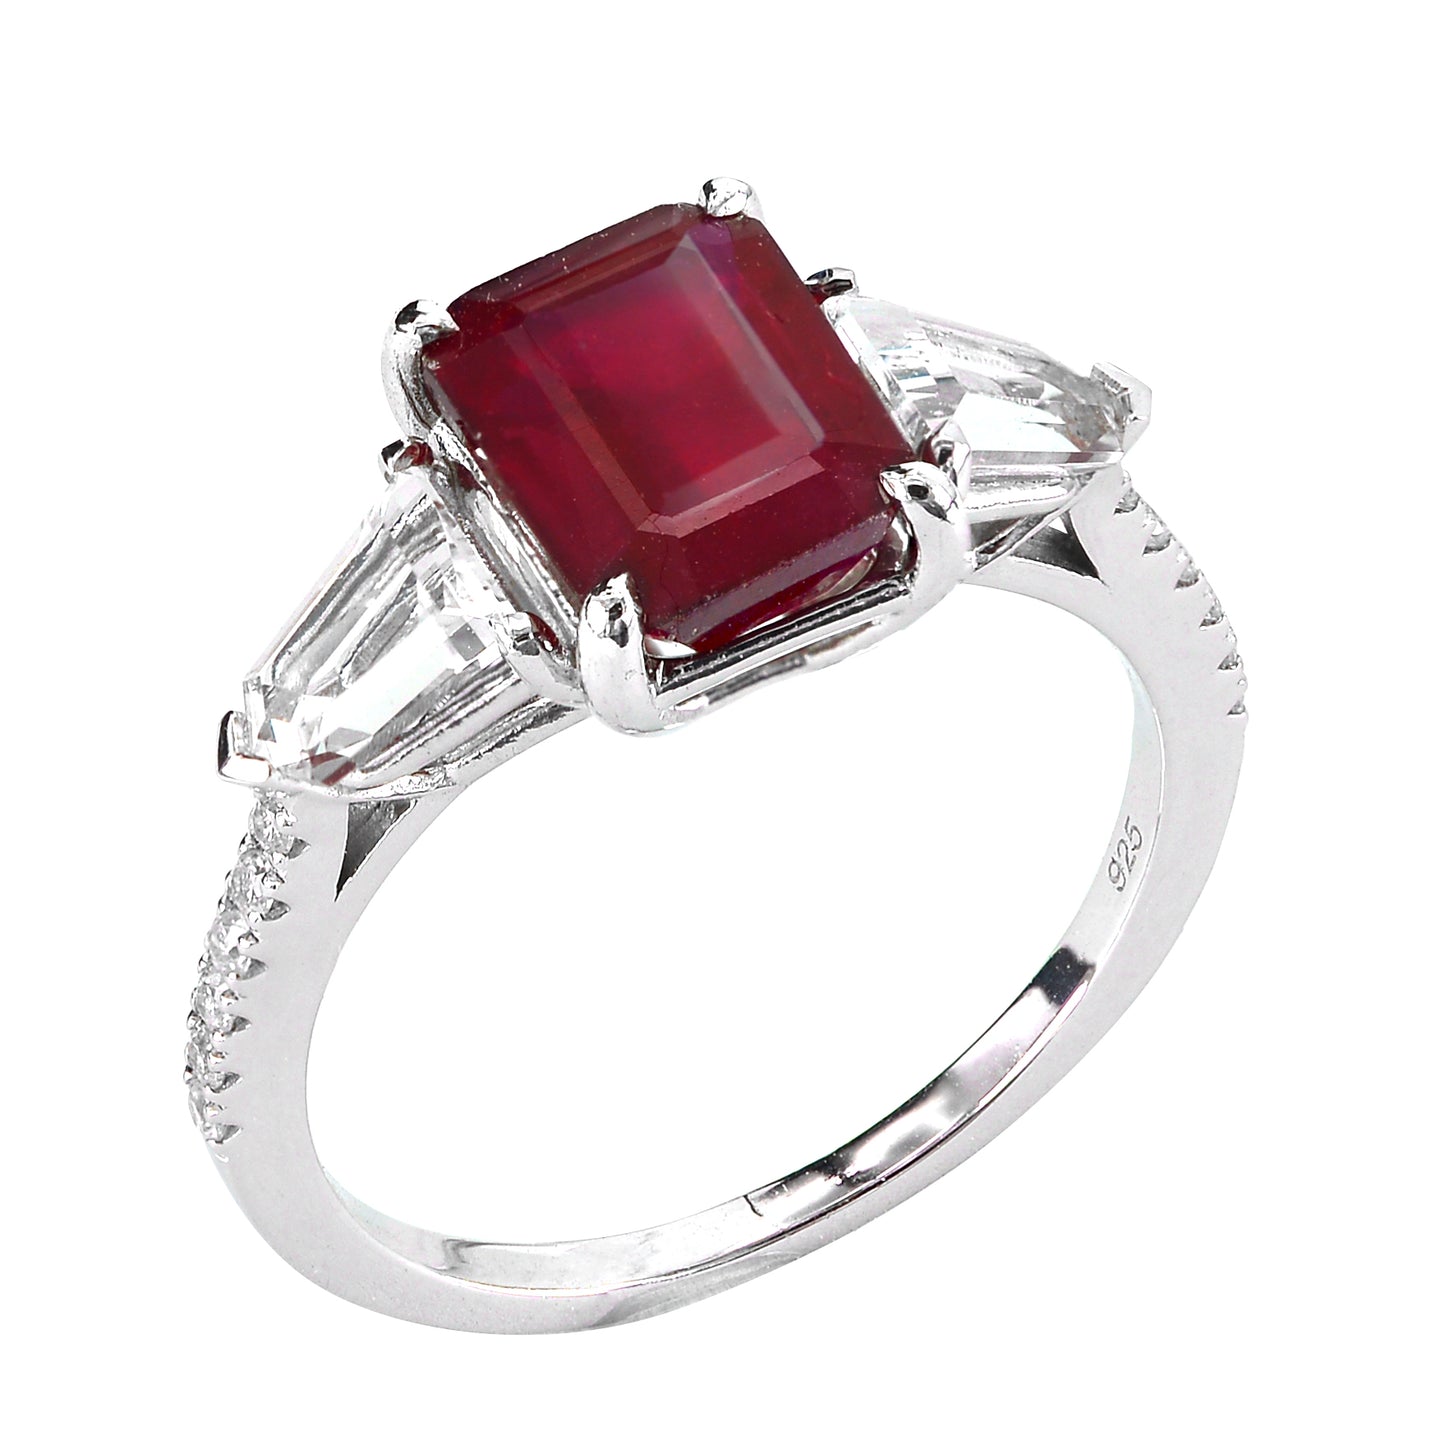 Live in Colors - Ruby ring